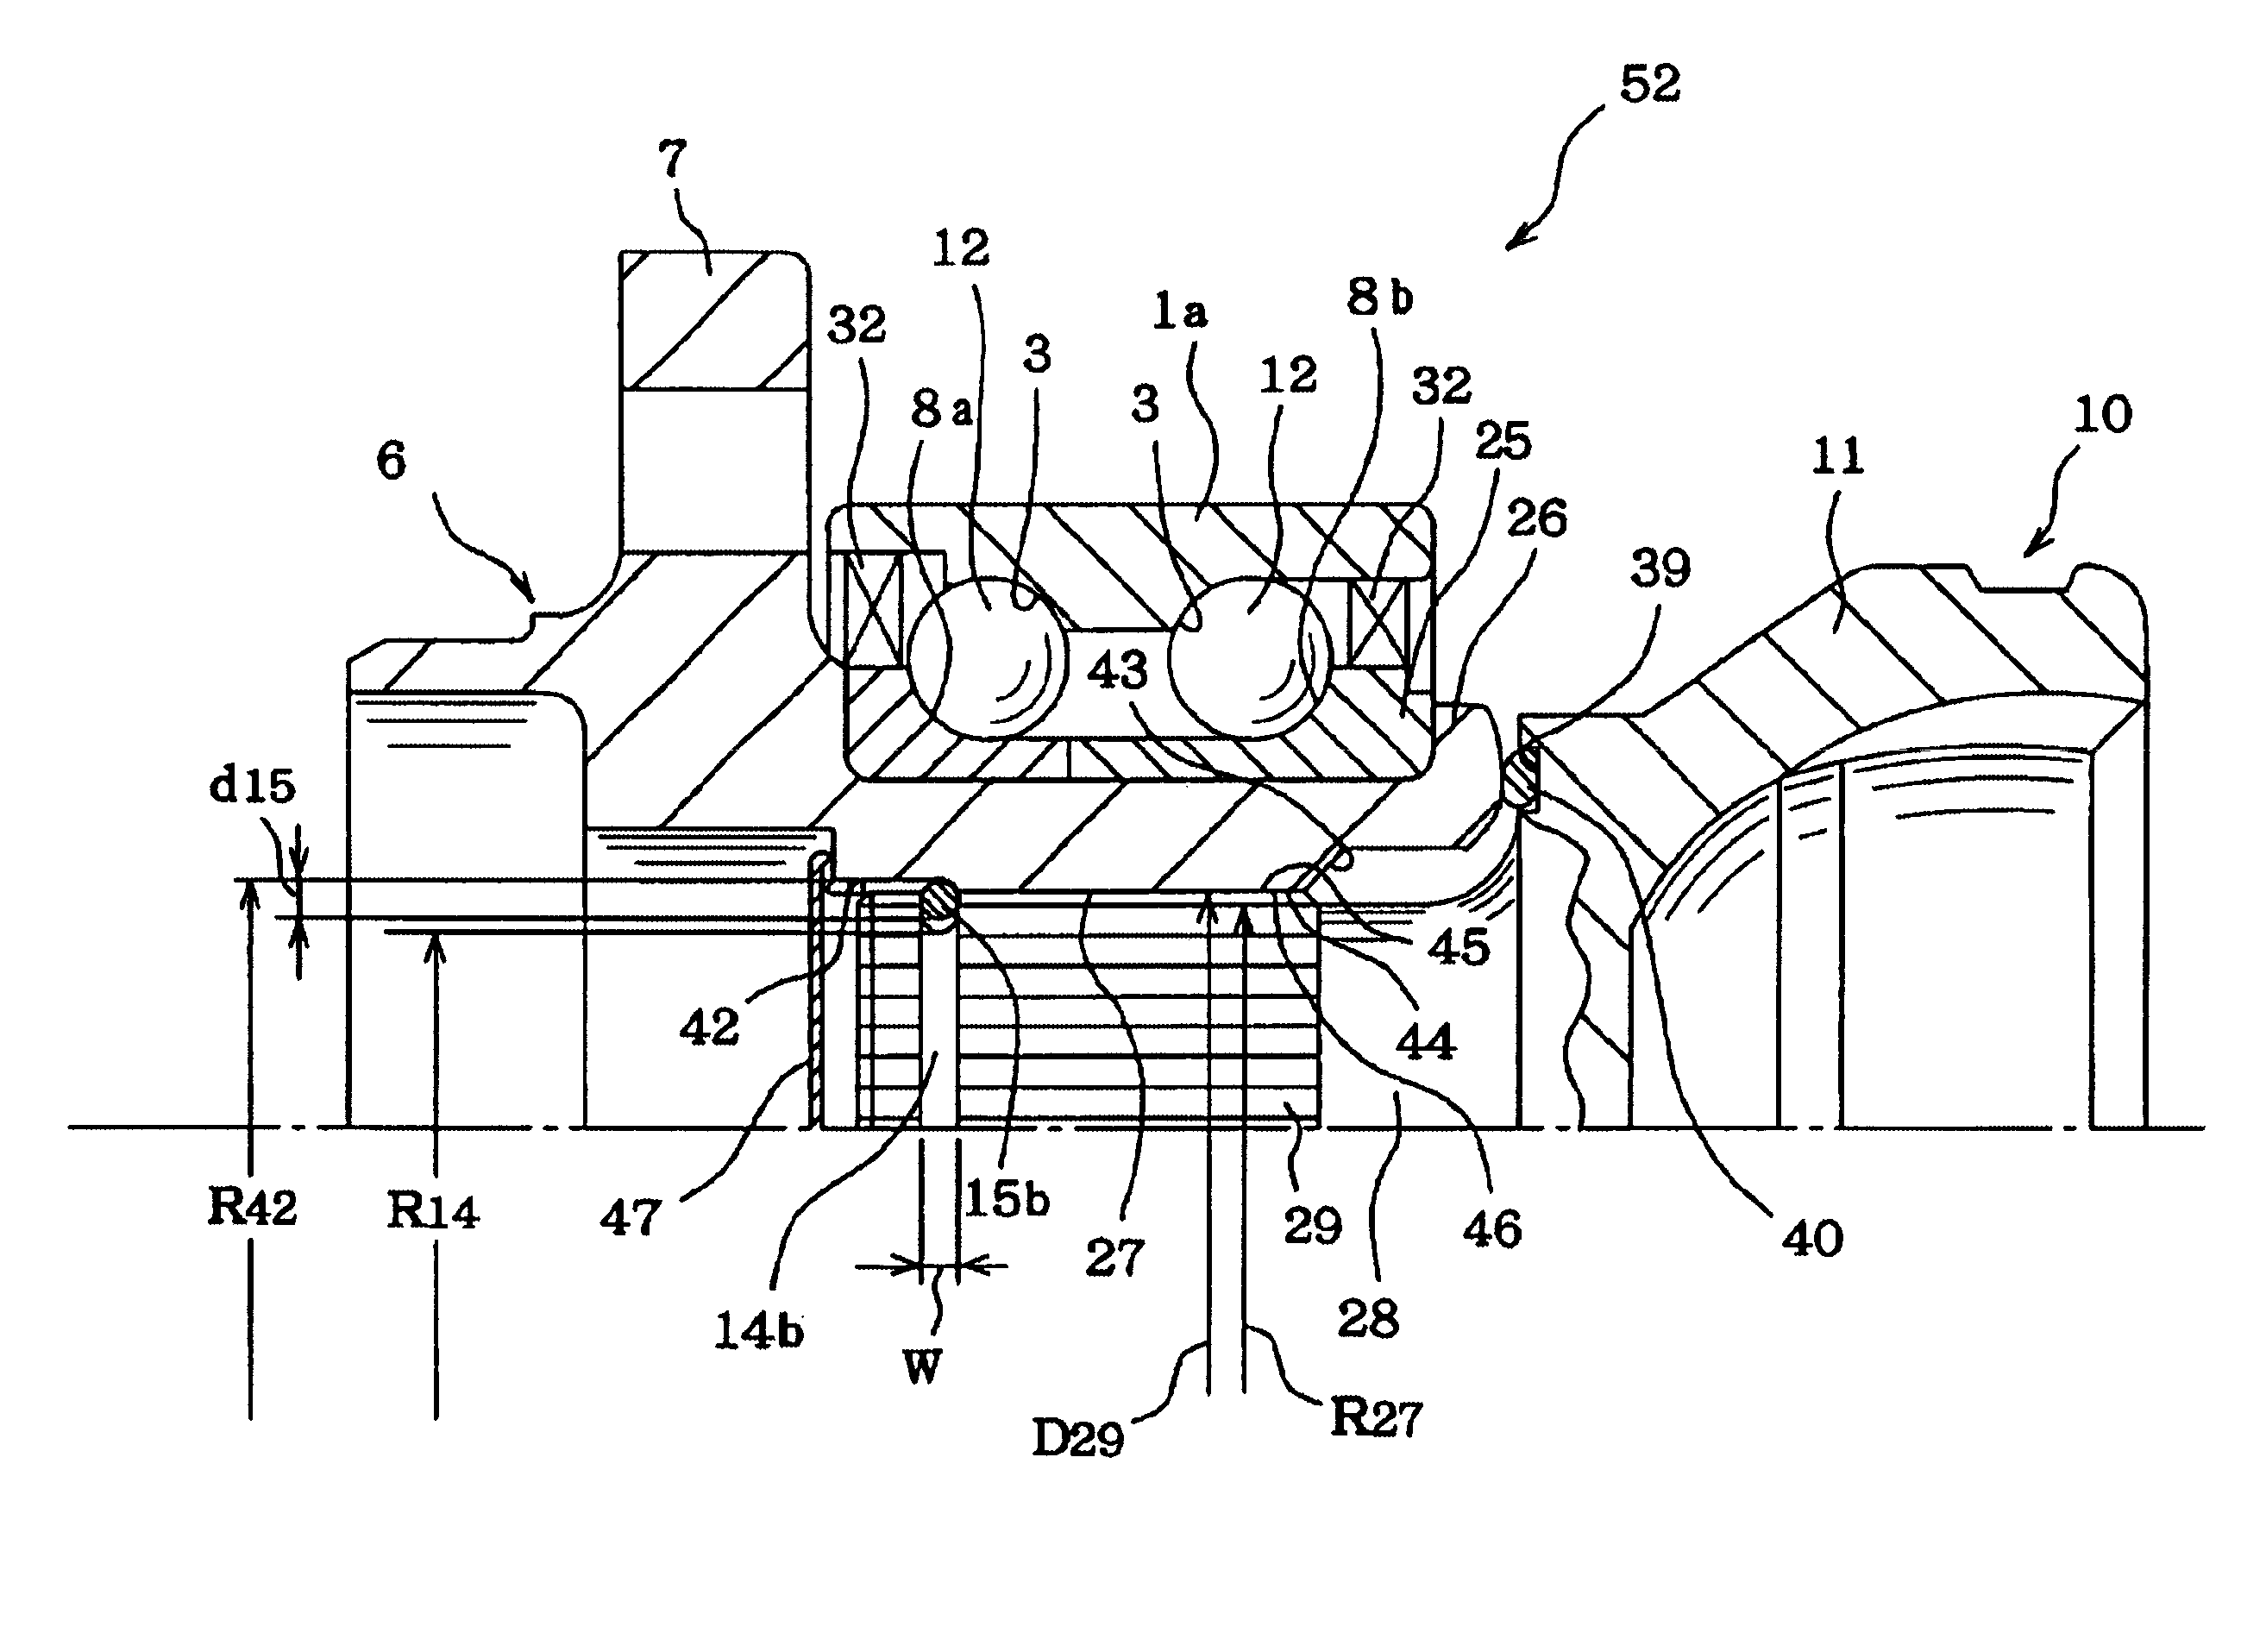 Drive unit for wheel and assembly method for the same